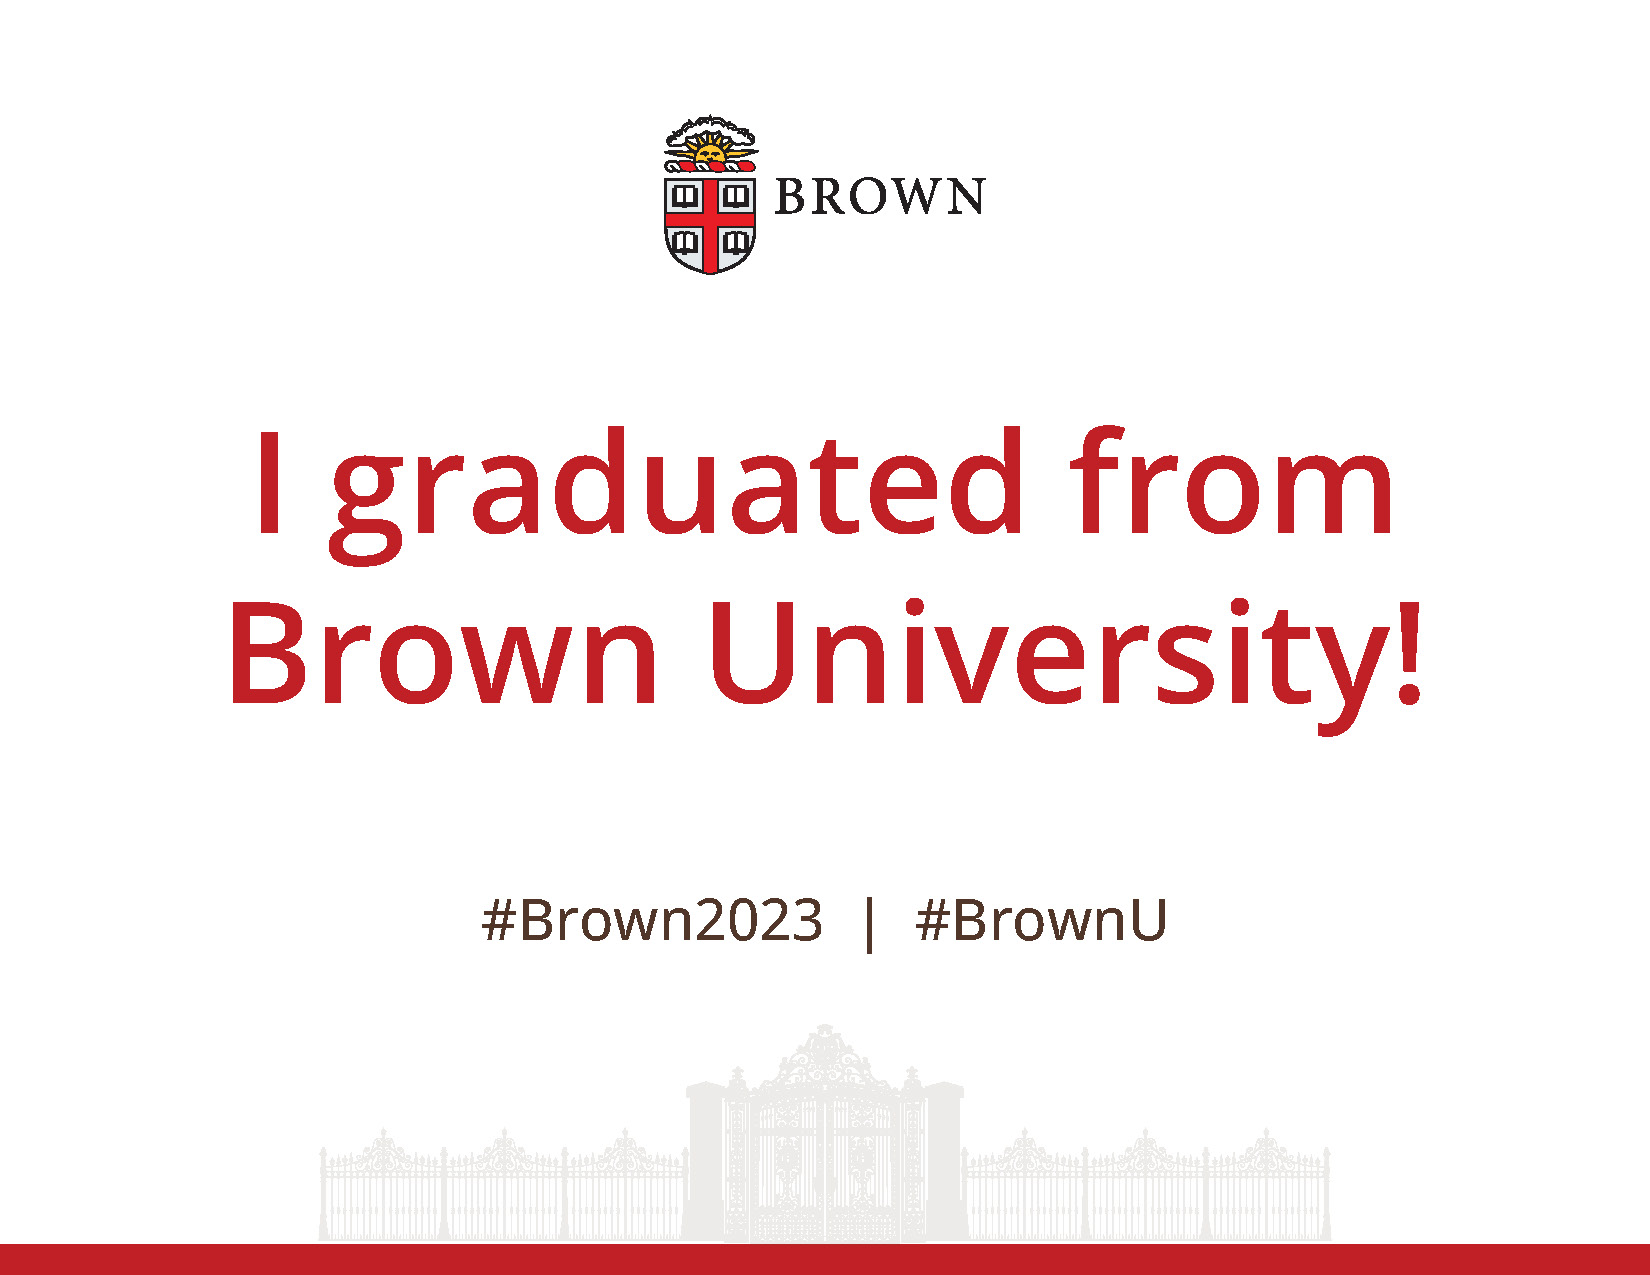 I graduated from Brown poster